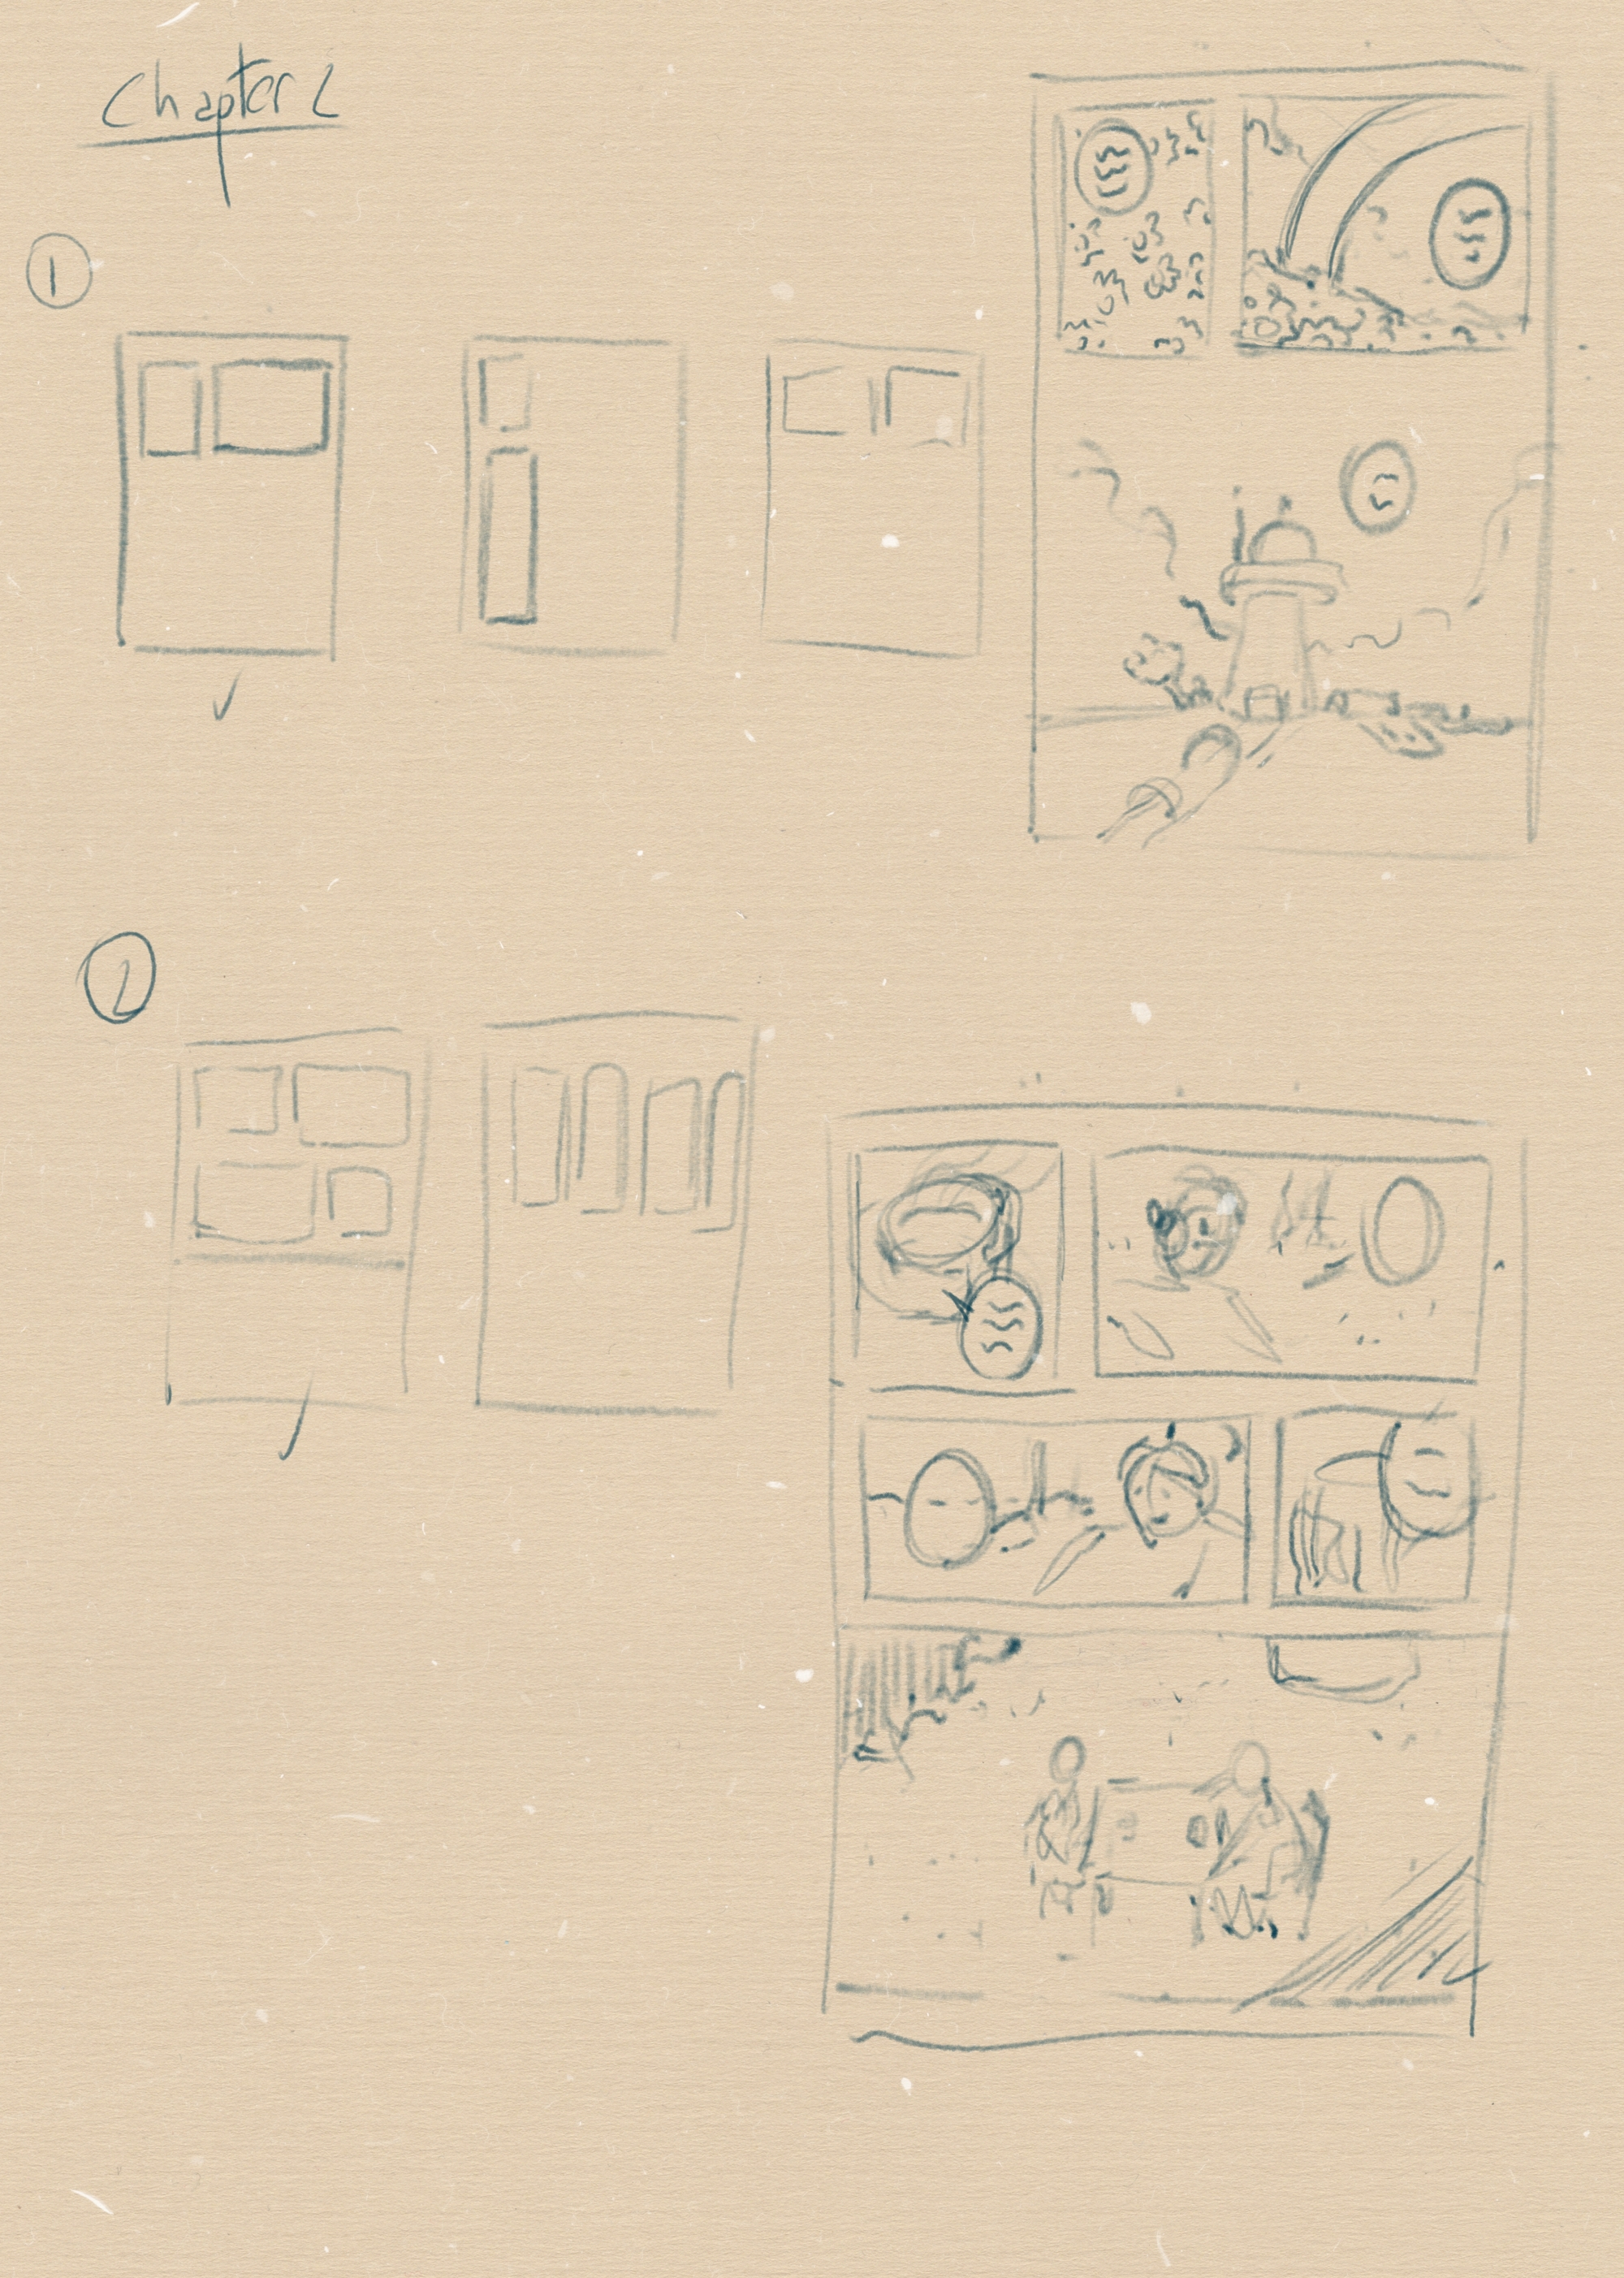 Sketches of two pages of chapter 1.2